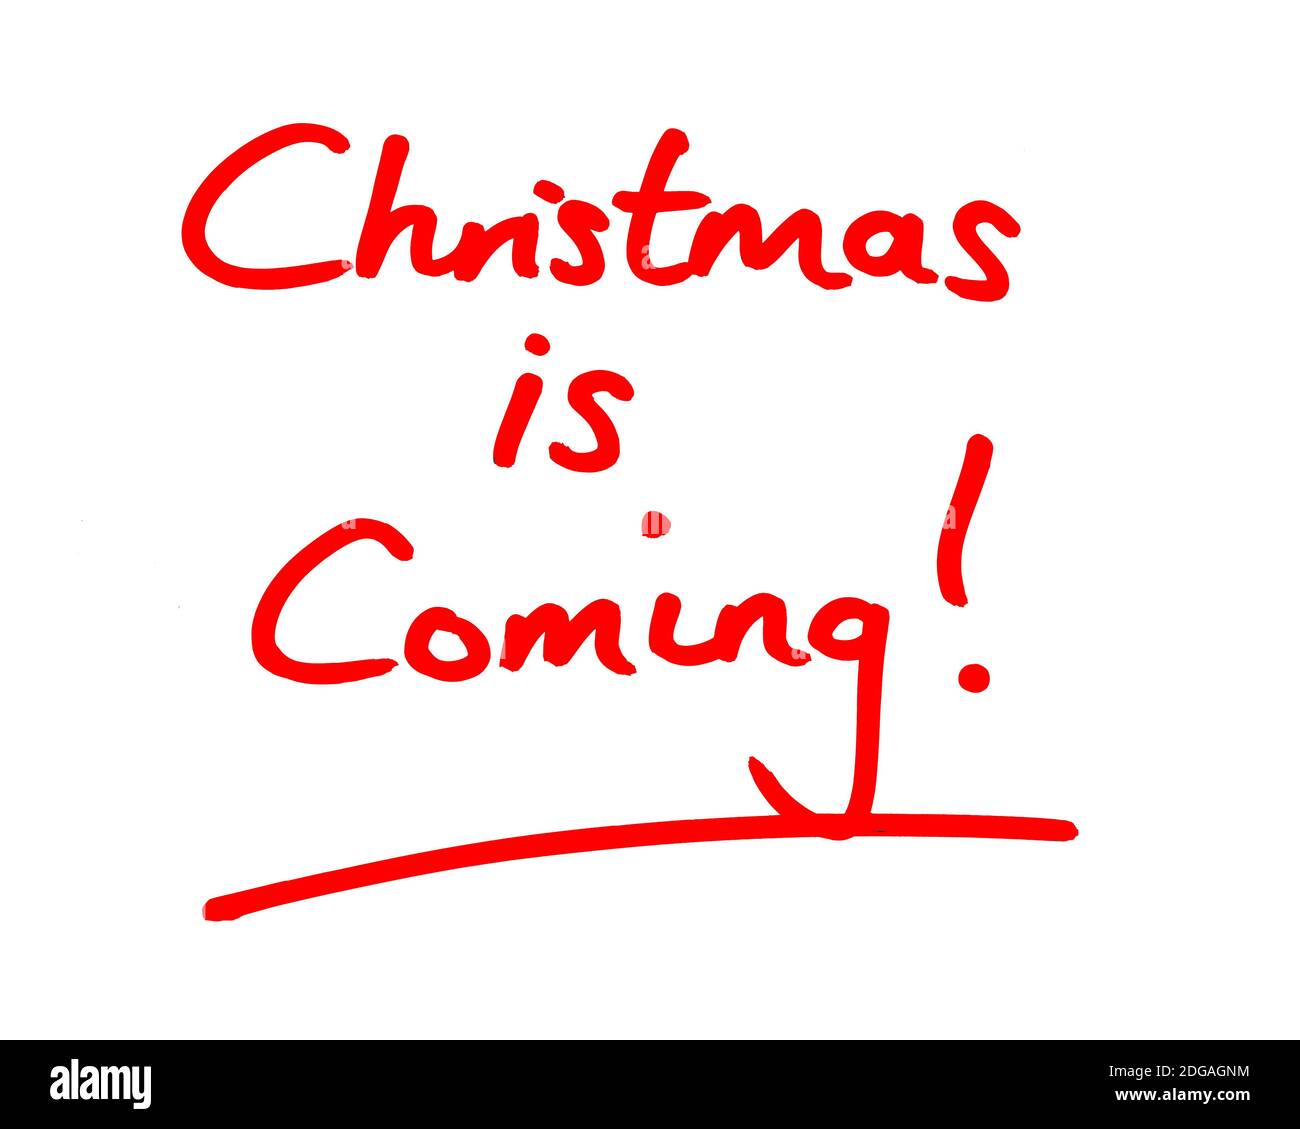 Christmas is Coming! handwritten on a white background. Stock Photo